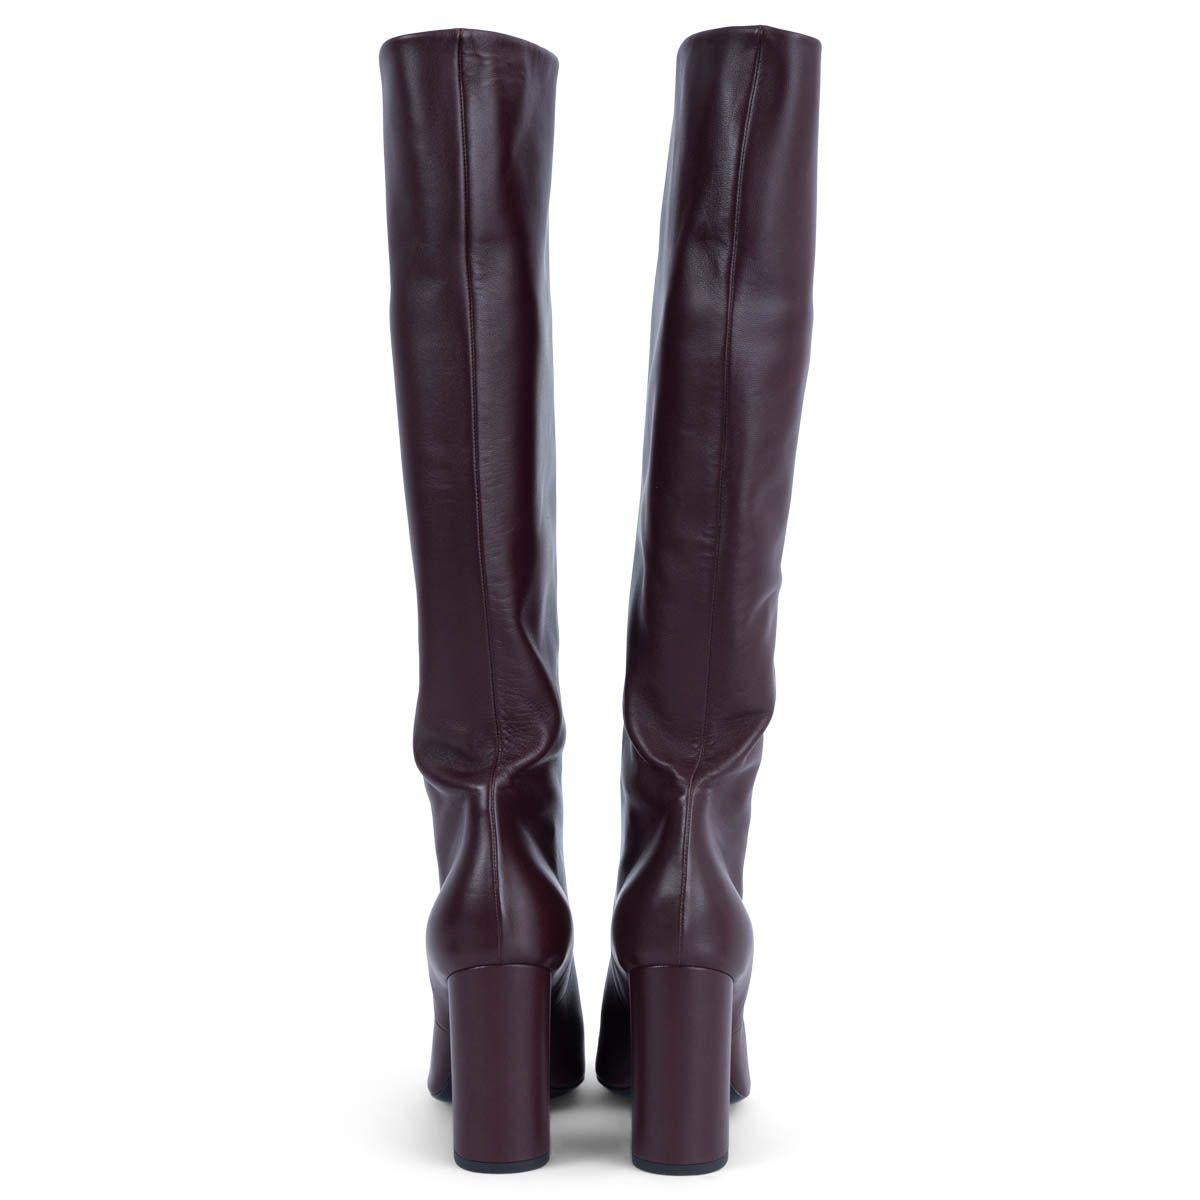 SAINT LAURENT burgundy leather LOU 96 Knee High Boots Shoes 37.5 In Excellent Condition For Sale In Zürich, CH